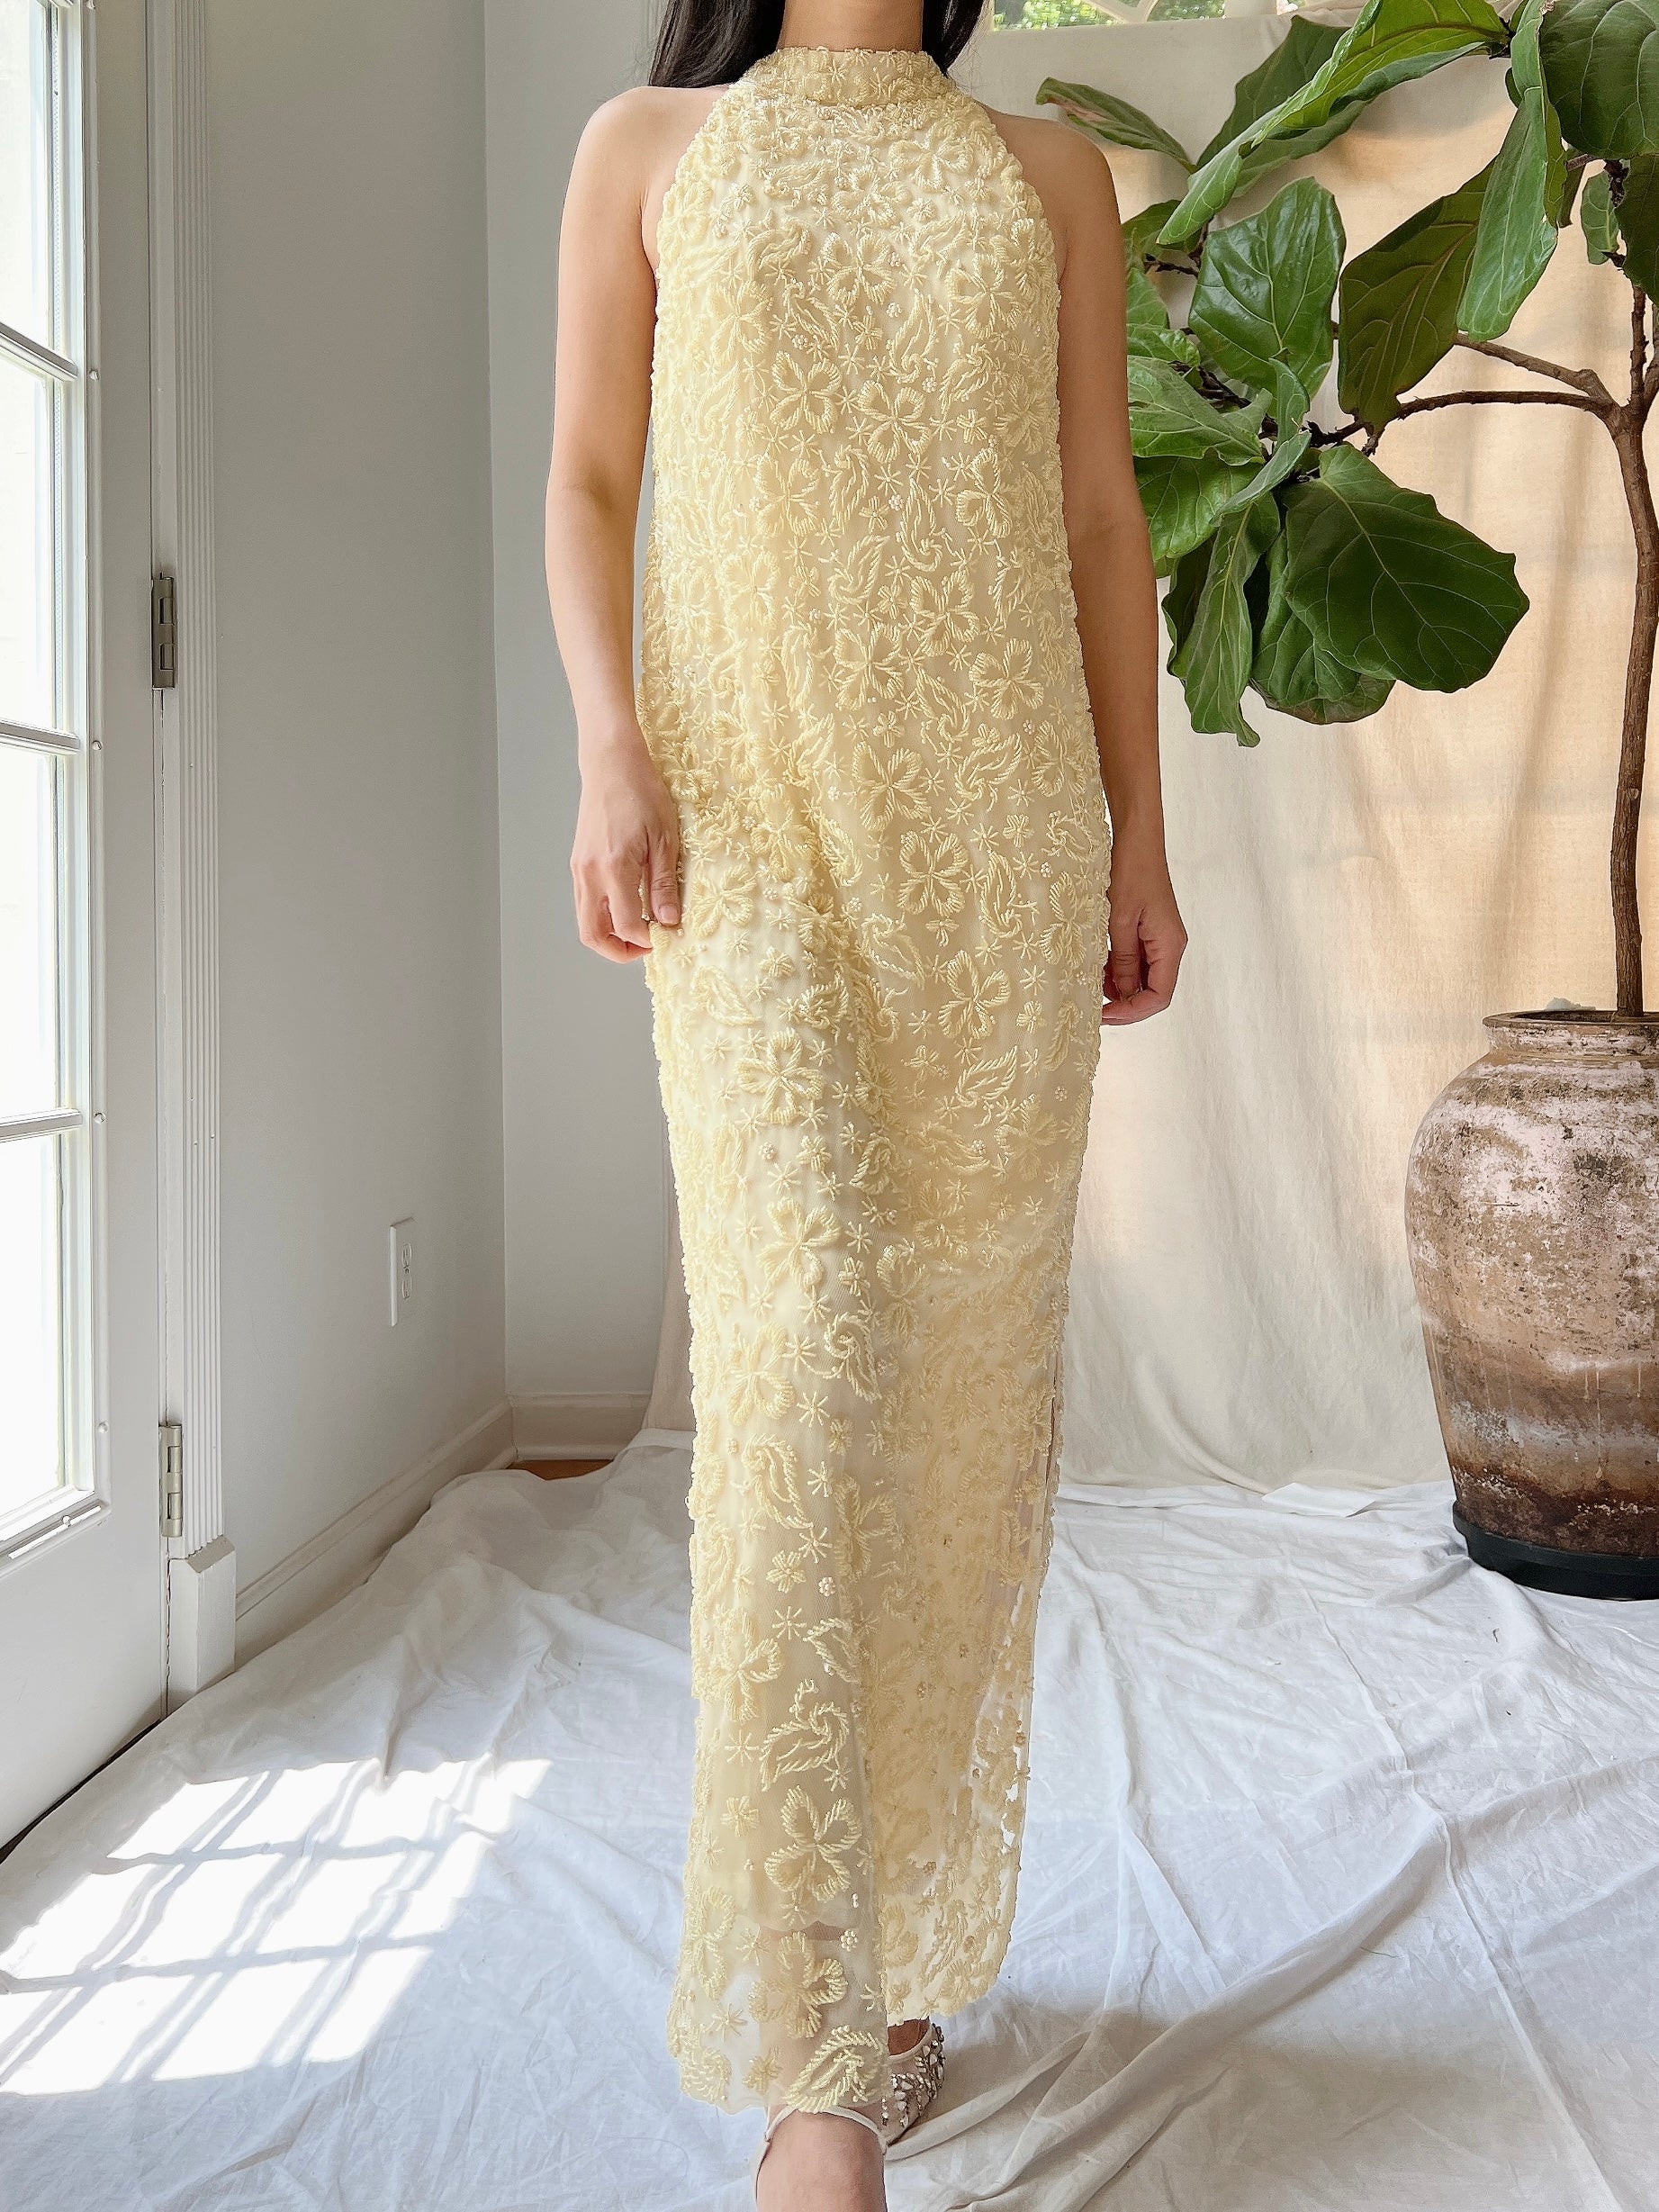 1960s Butter Yellow Beaded Tulle Dress - M